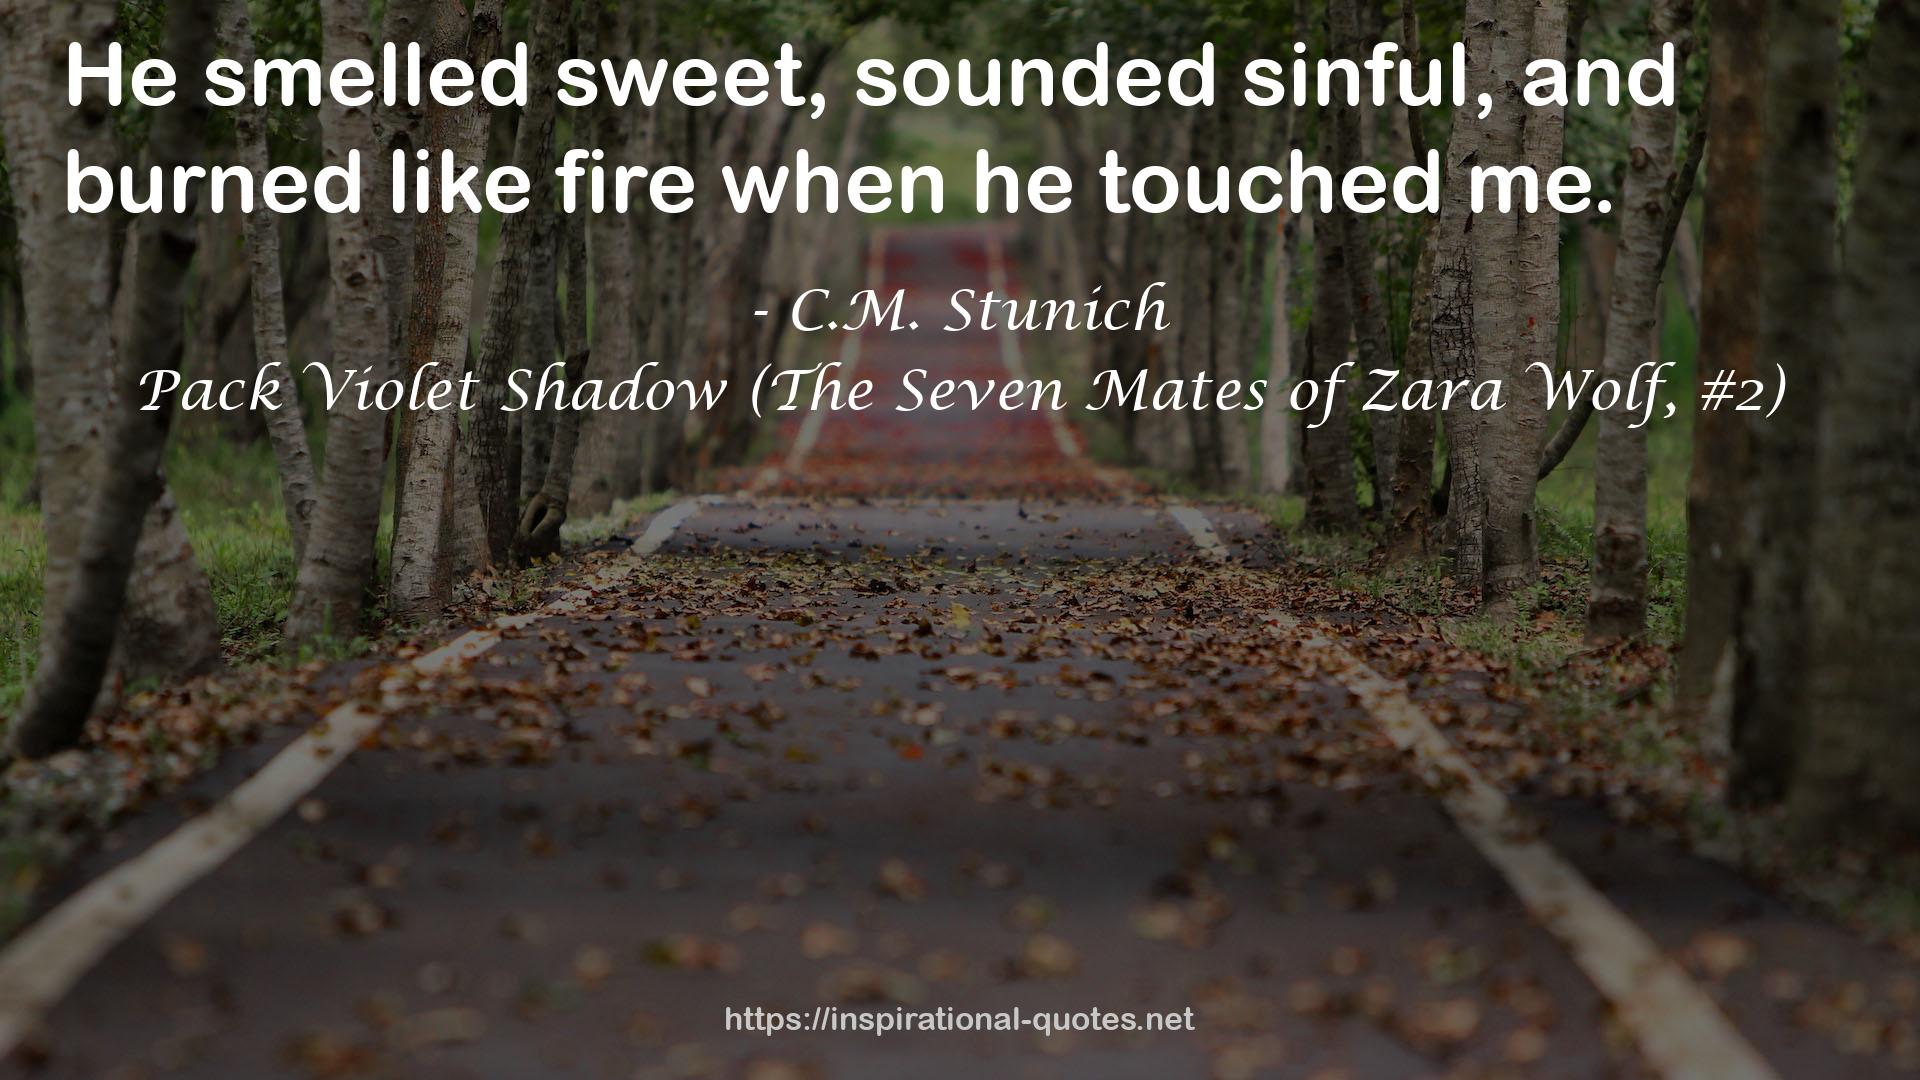 Pack Violet Shadow (The Seven Mates of Zara Wolf, #2) QUOTES